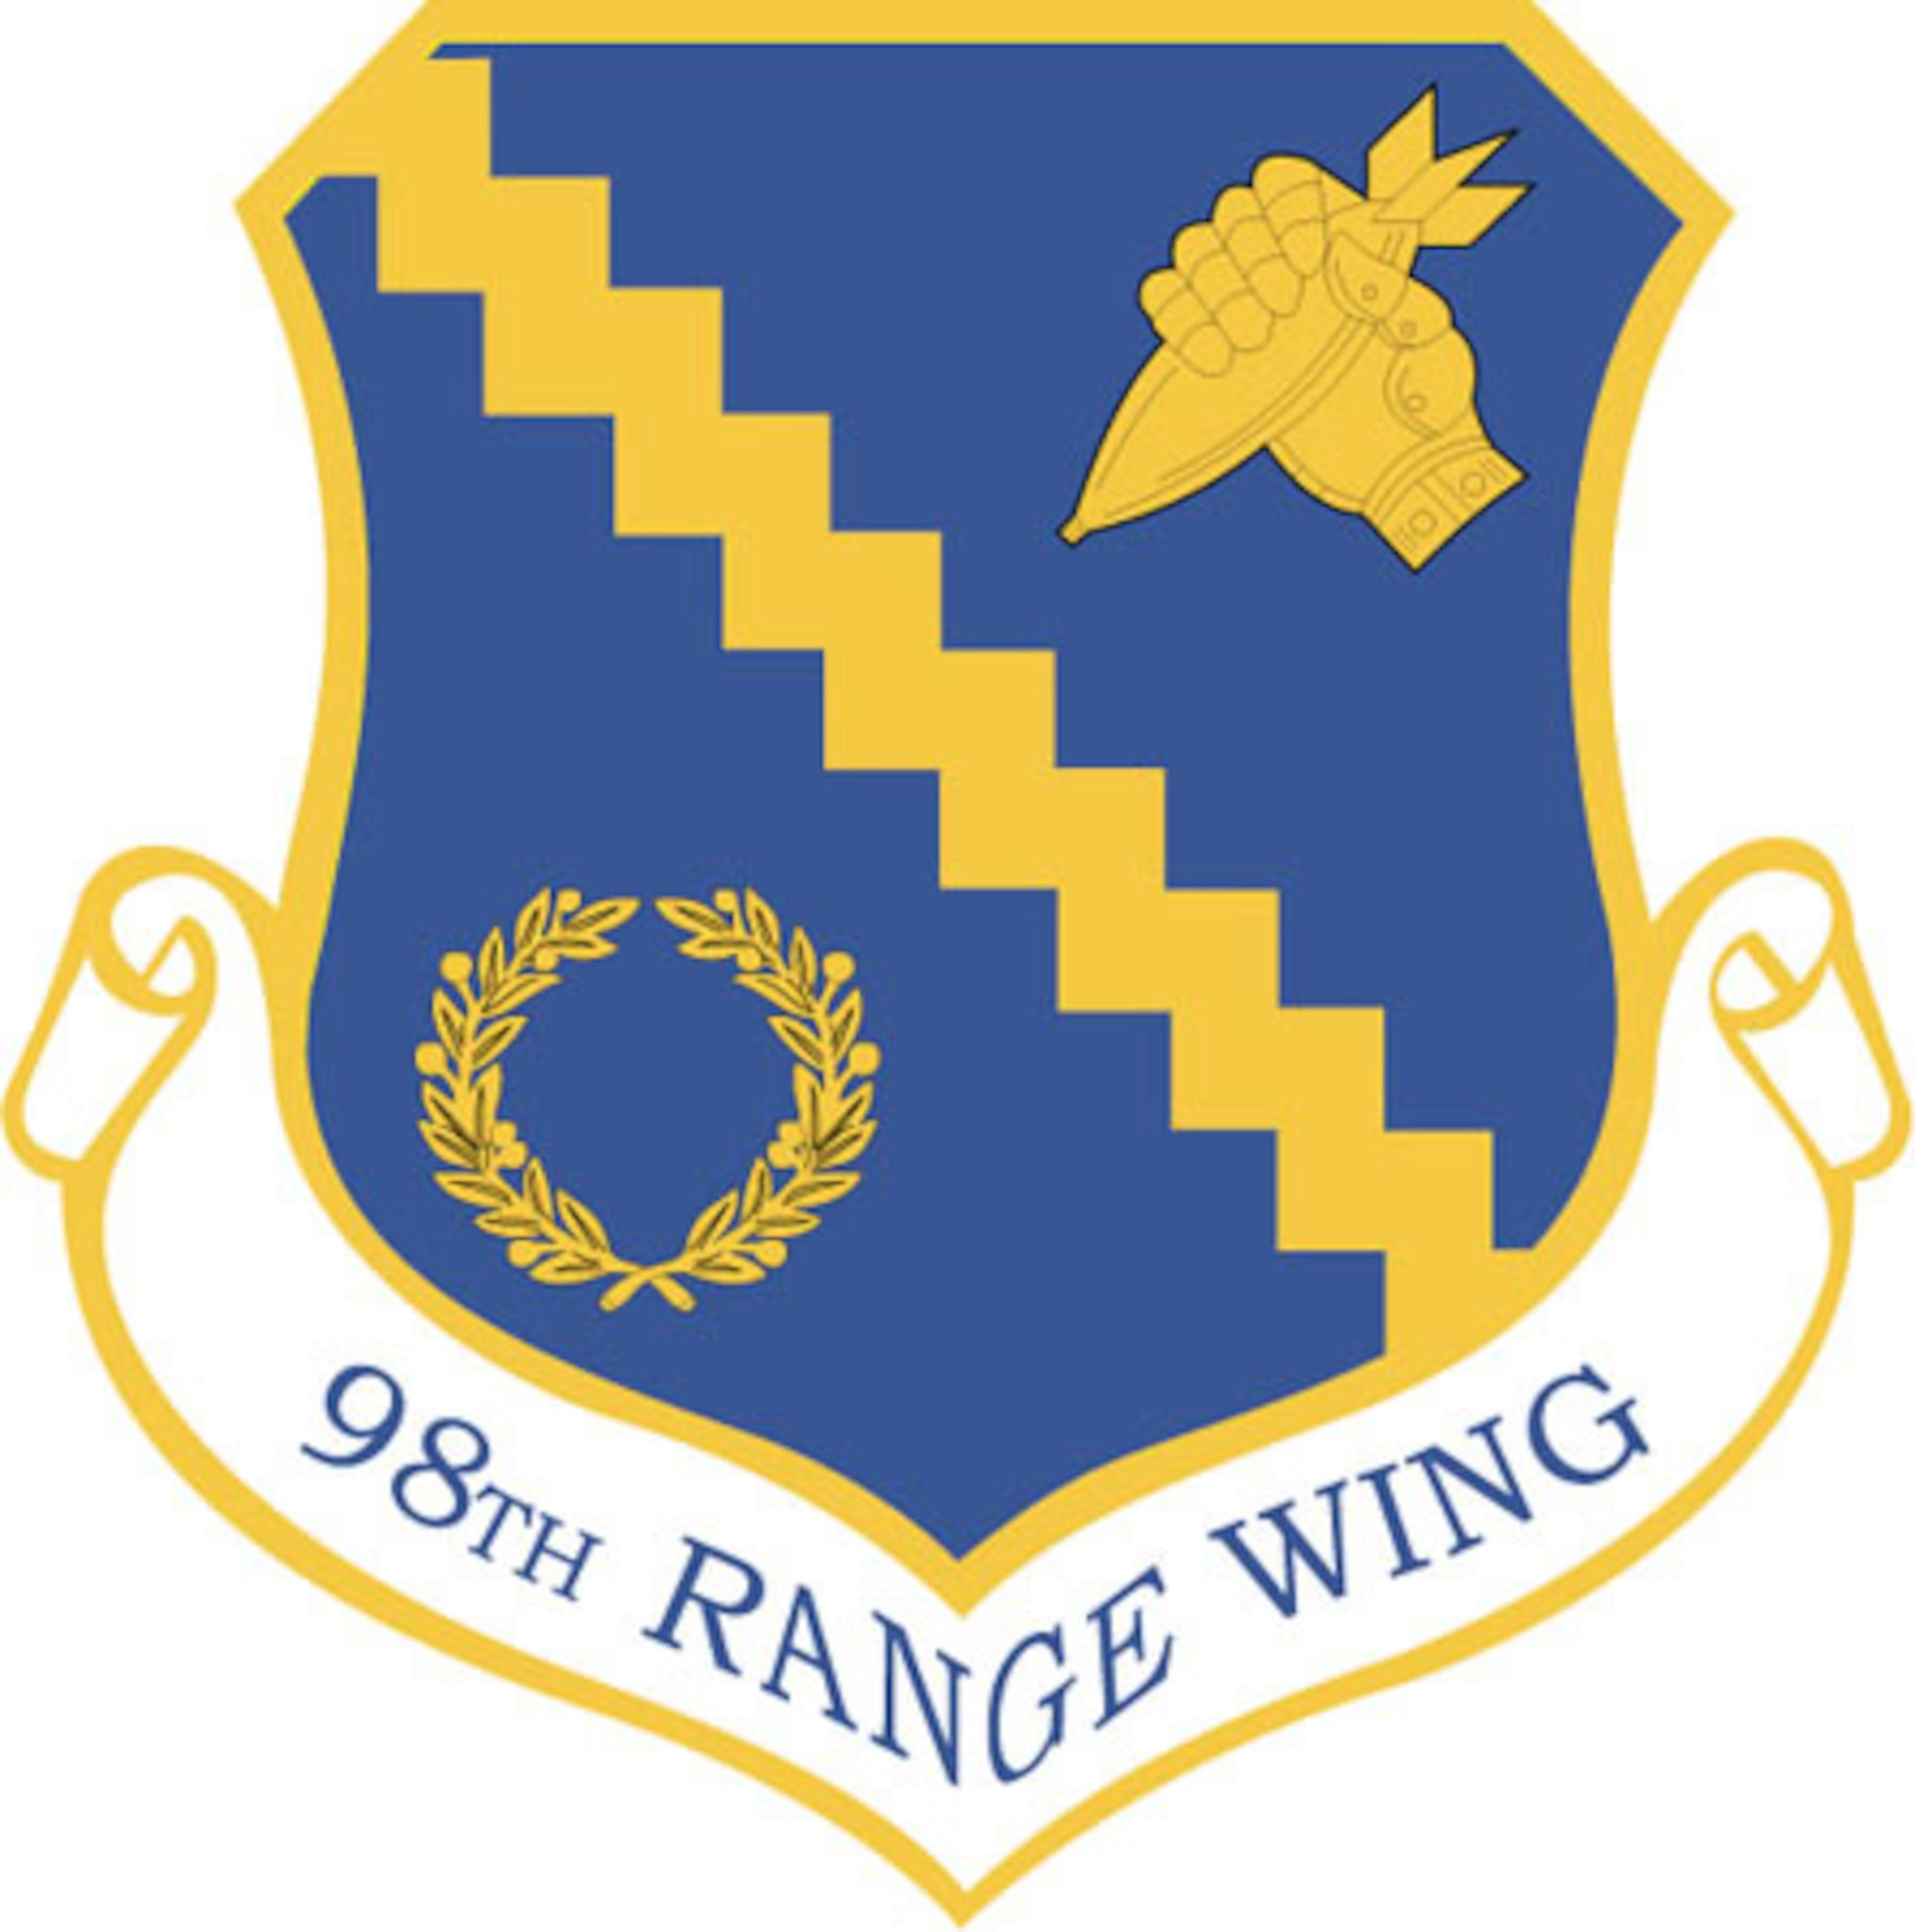 The 98th Range Wing provides command and control of the Nevada Test and Training Range (NTTR). The commander coordinates, prioritizes and is the approval authority for activities involving other governmental agencies, departments and commercial activities on the NTTR. The 98th RANW integrates and provides support for test and training programs that have a direct effect on the war-fighting capabilities of the combat air forces